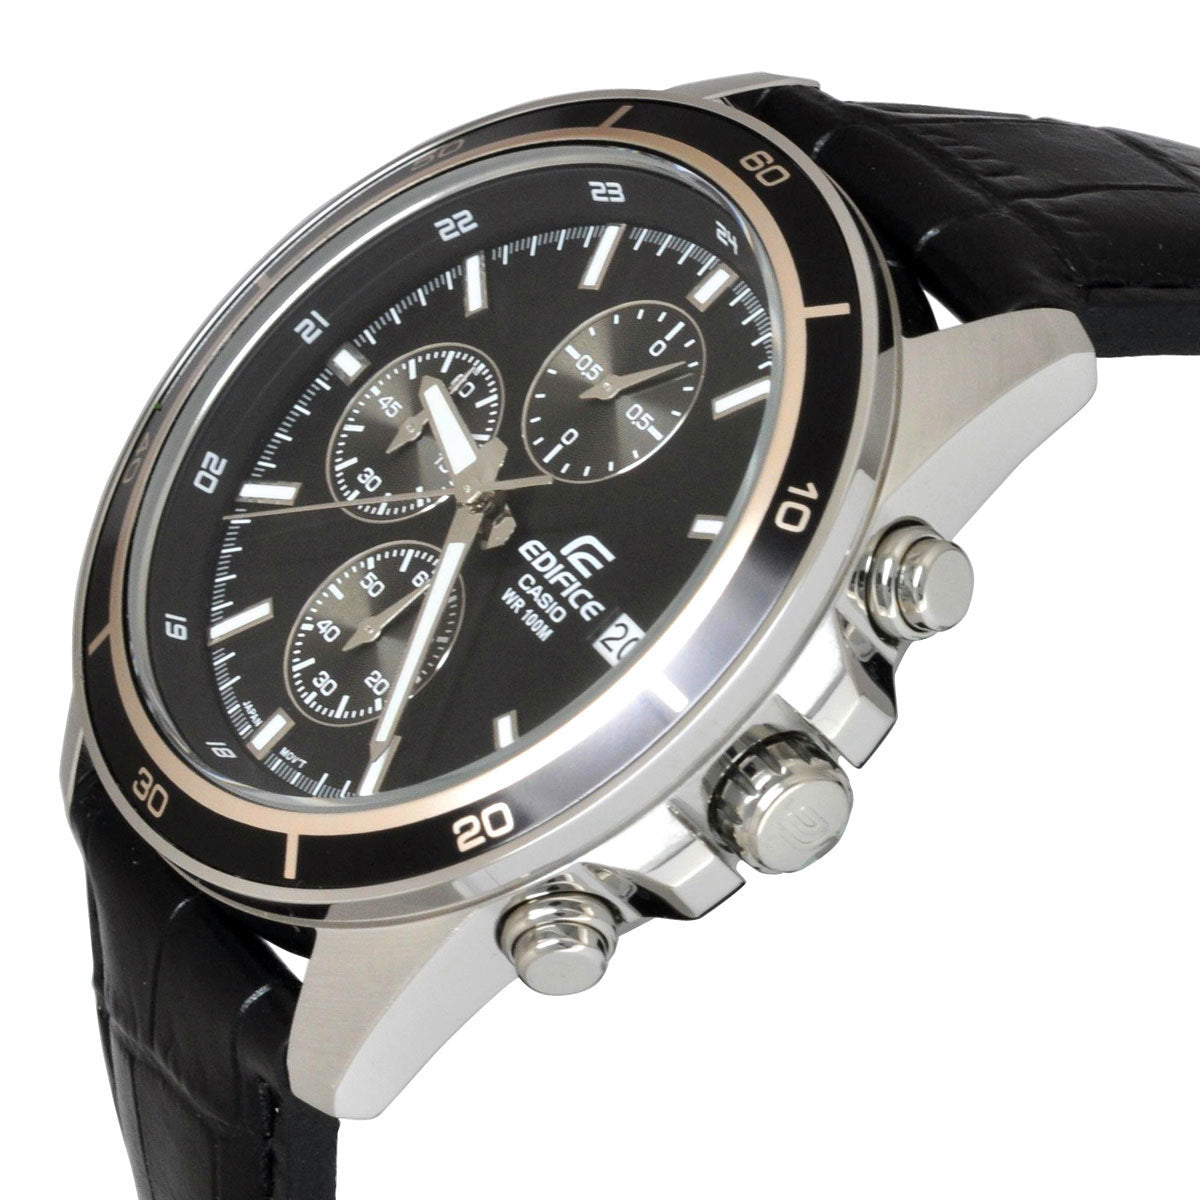 Casio Edifice EFR-526L-1A Chronograph Leather Strap Watch For Men-Watch Portal Philippines